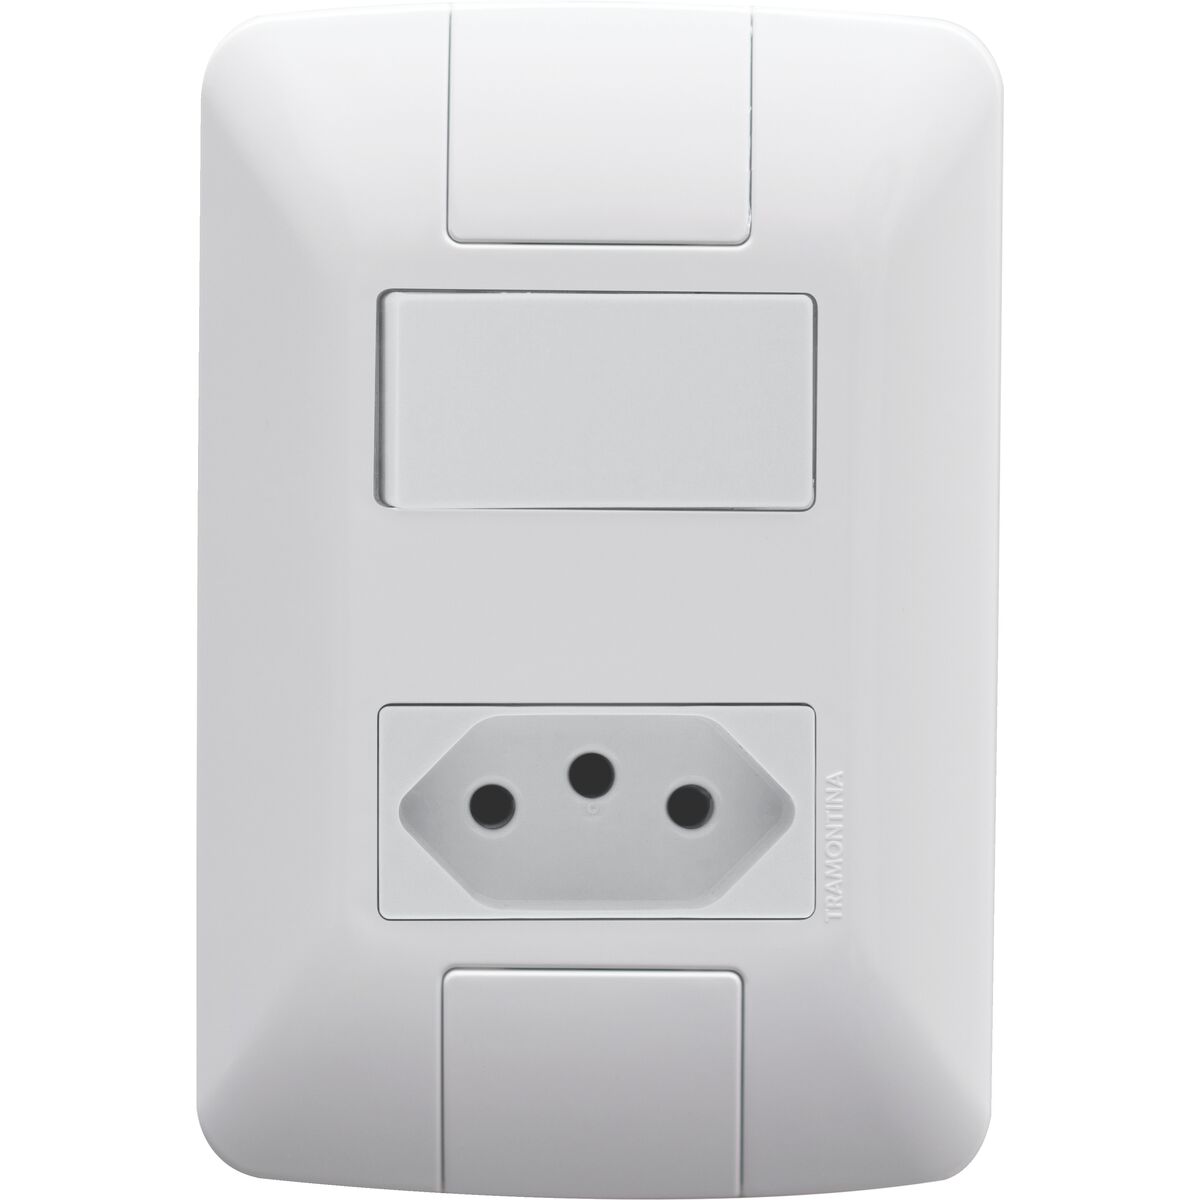 Tramontina Aria white 4x2 set with 1 two-way switch, 6 A and 250 V, and 1 2P+T outlet, 10 A and 250 V